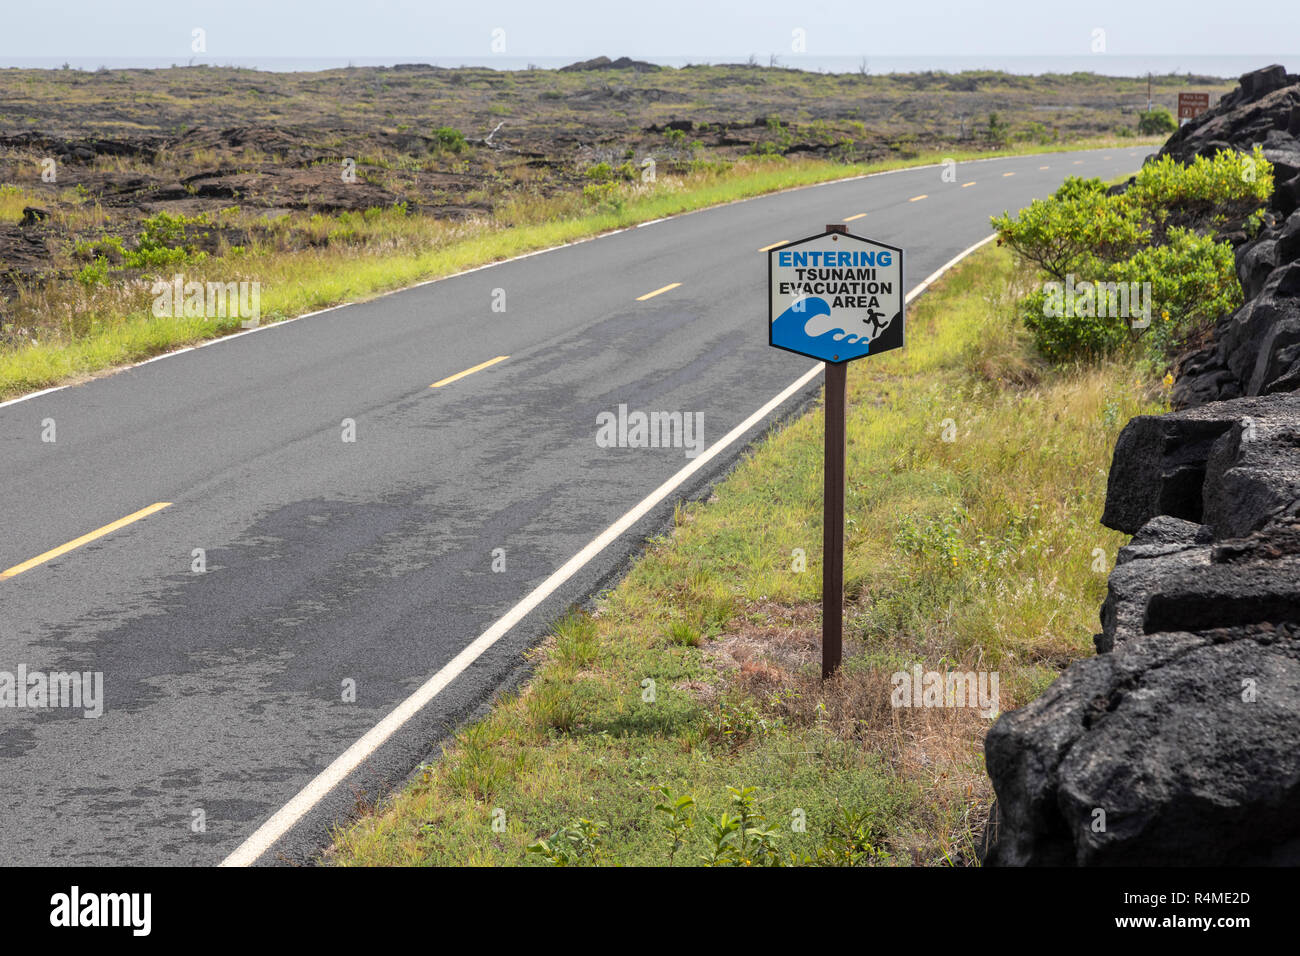 Hawaii Volcanoes National Park, Hawaii - A sign along the Chain of Craters Road near the Pacific Ocean designates a tsunami evacuation area. Stock Photo